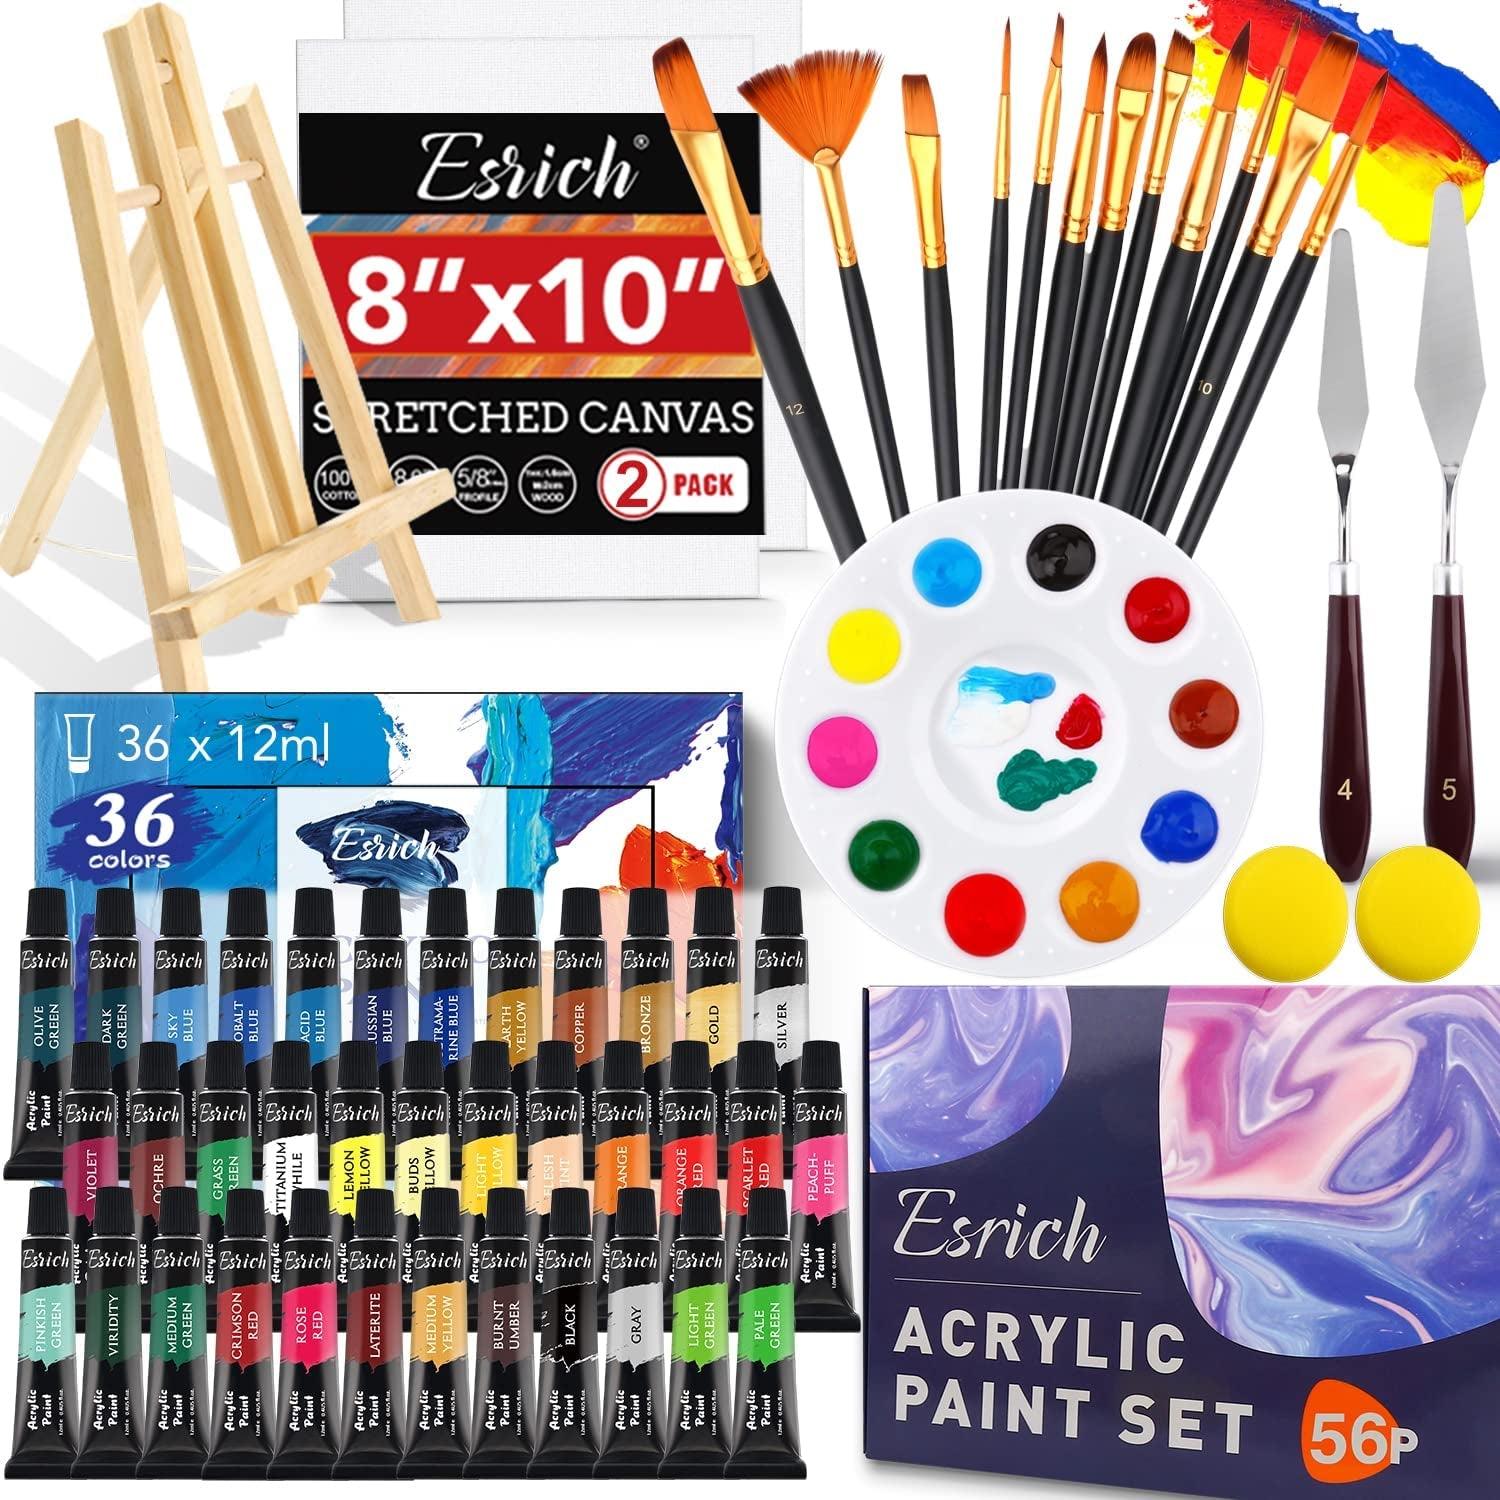 U.S. Art Supply 46-Piece Complete Artist Painting Set with Easel - 12 Acrylic & 12 Watercolor Paint Colors, Brushes, Canvas Panels, Watercolor Pad, Pa